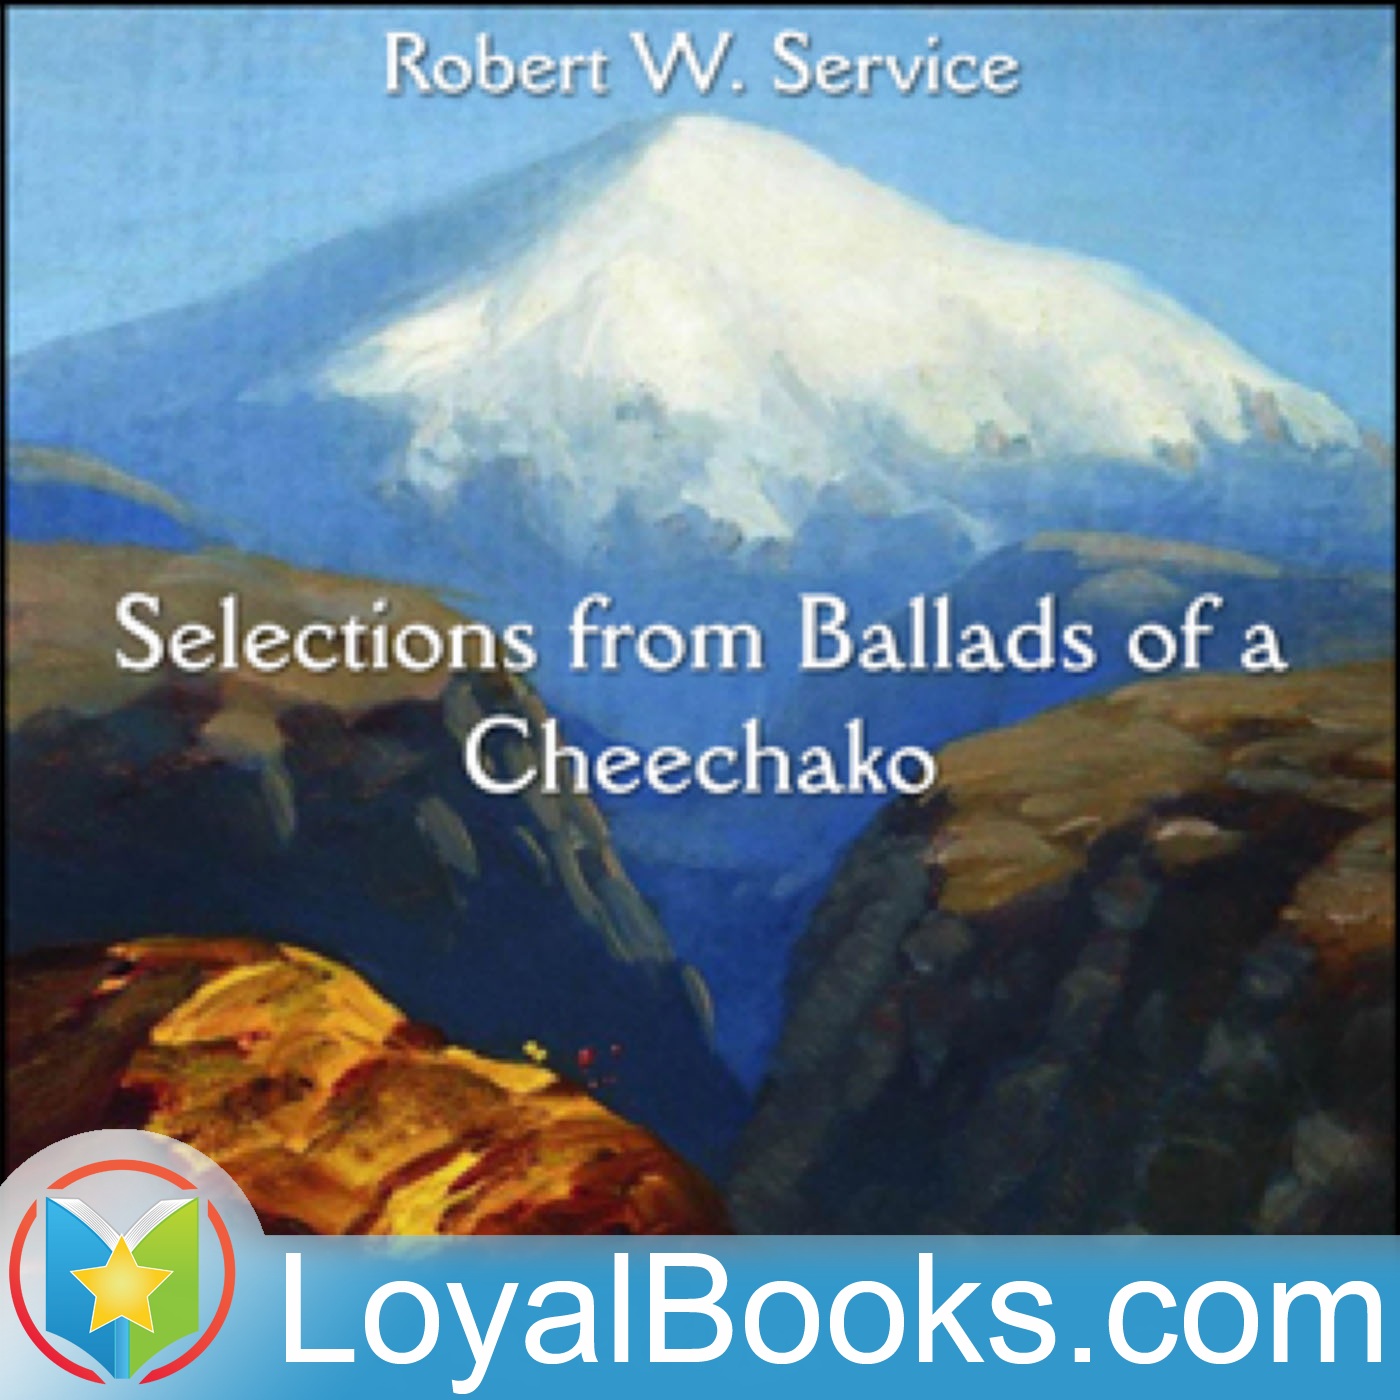 Selections from Ballads of a Cheechako by Robert W. Service